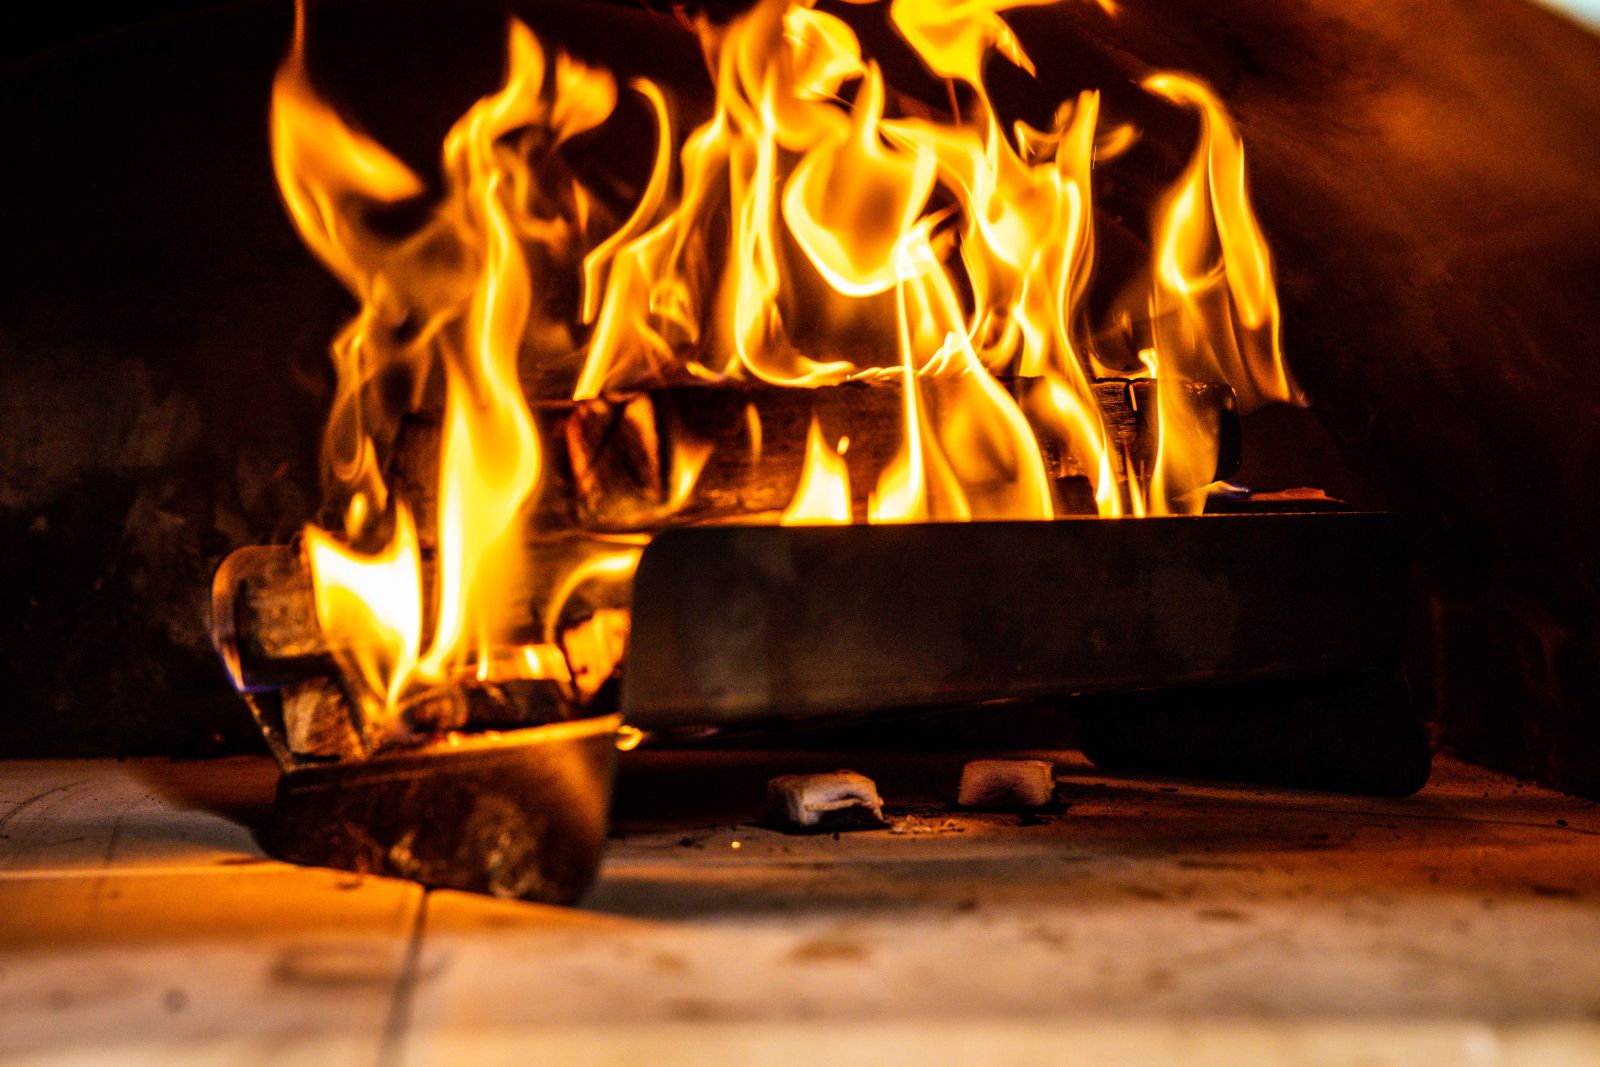 This_image_shows_wood_fired_pizza_oven_with_lit_kindling